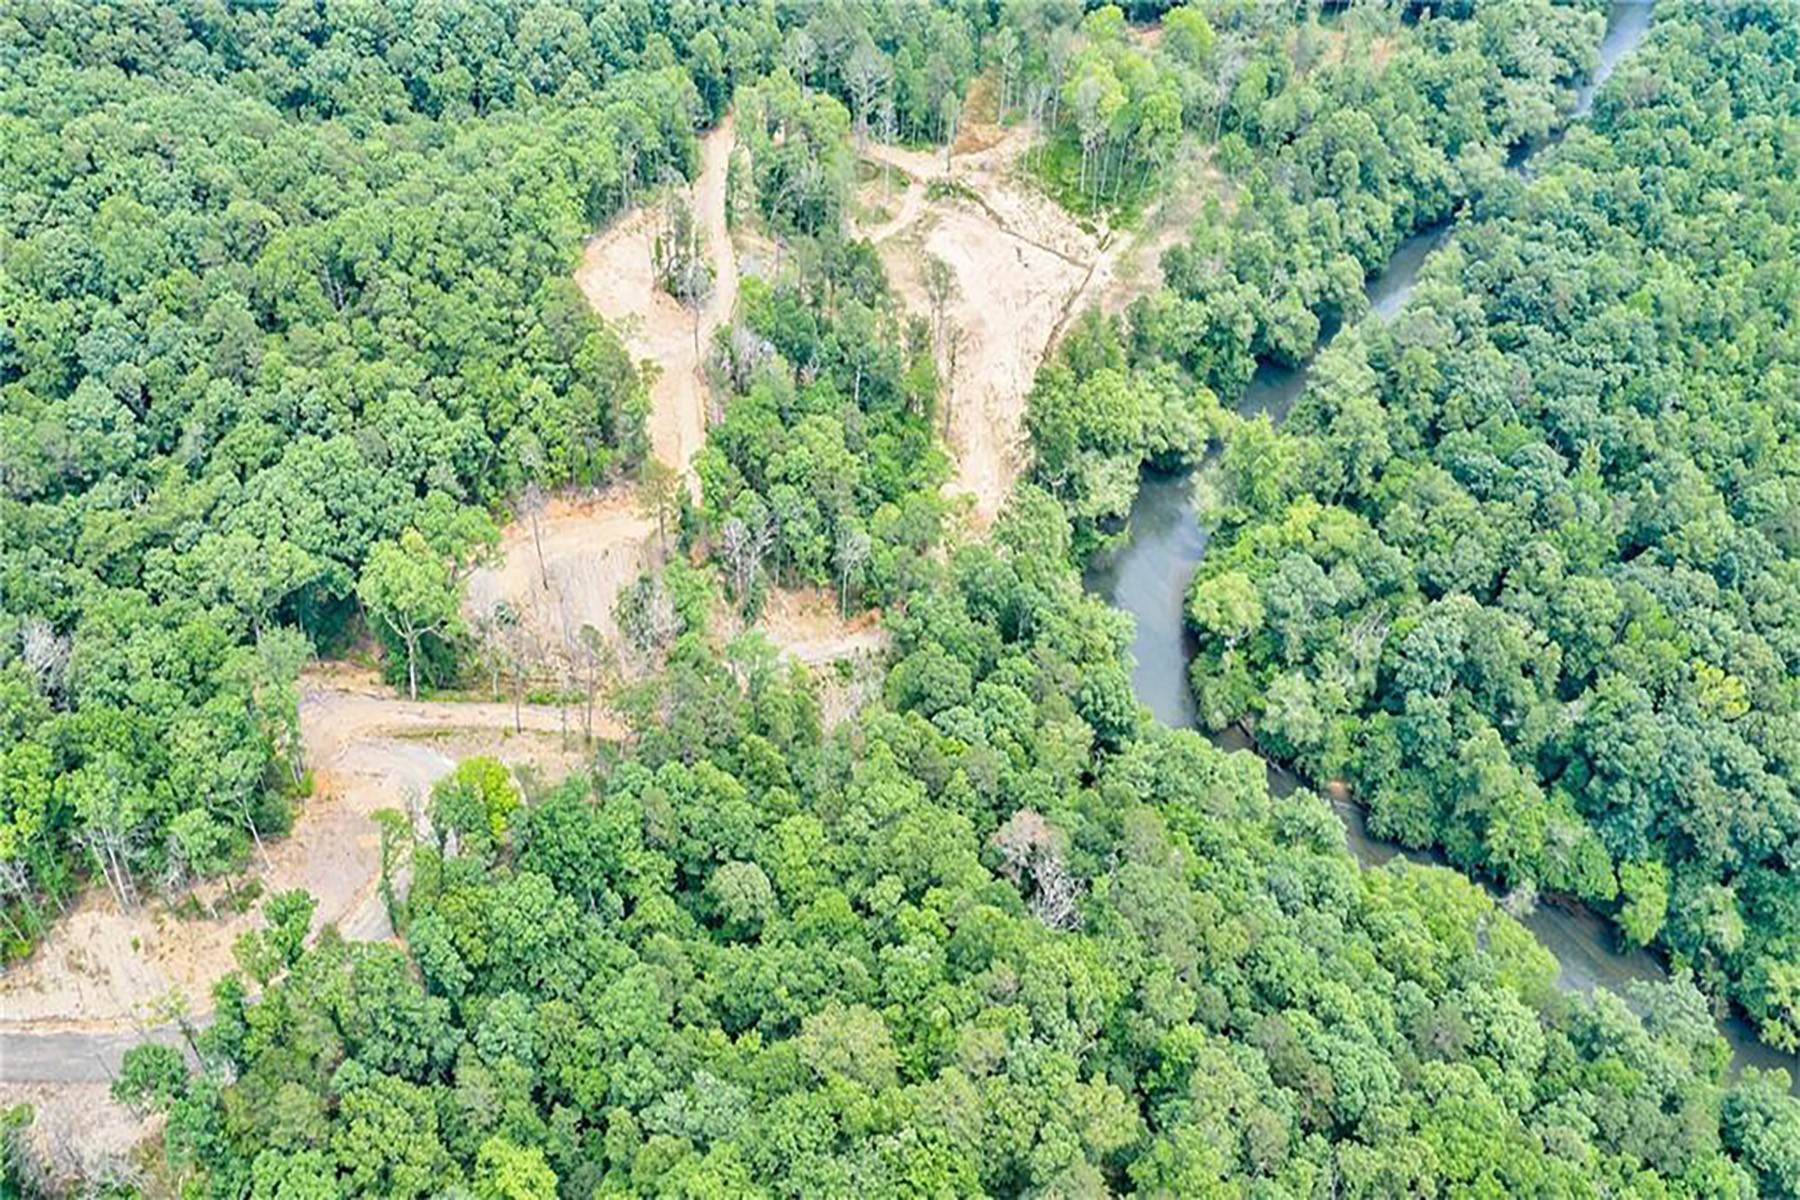 12. Land for Sale at Gorgeous Etowah River Frontage And 25,000 Acre Dawson Forest Access 0 Etowah Overlook Road Dawsonville, Georgia 30534 United States